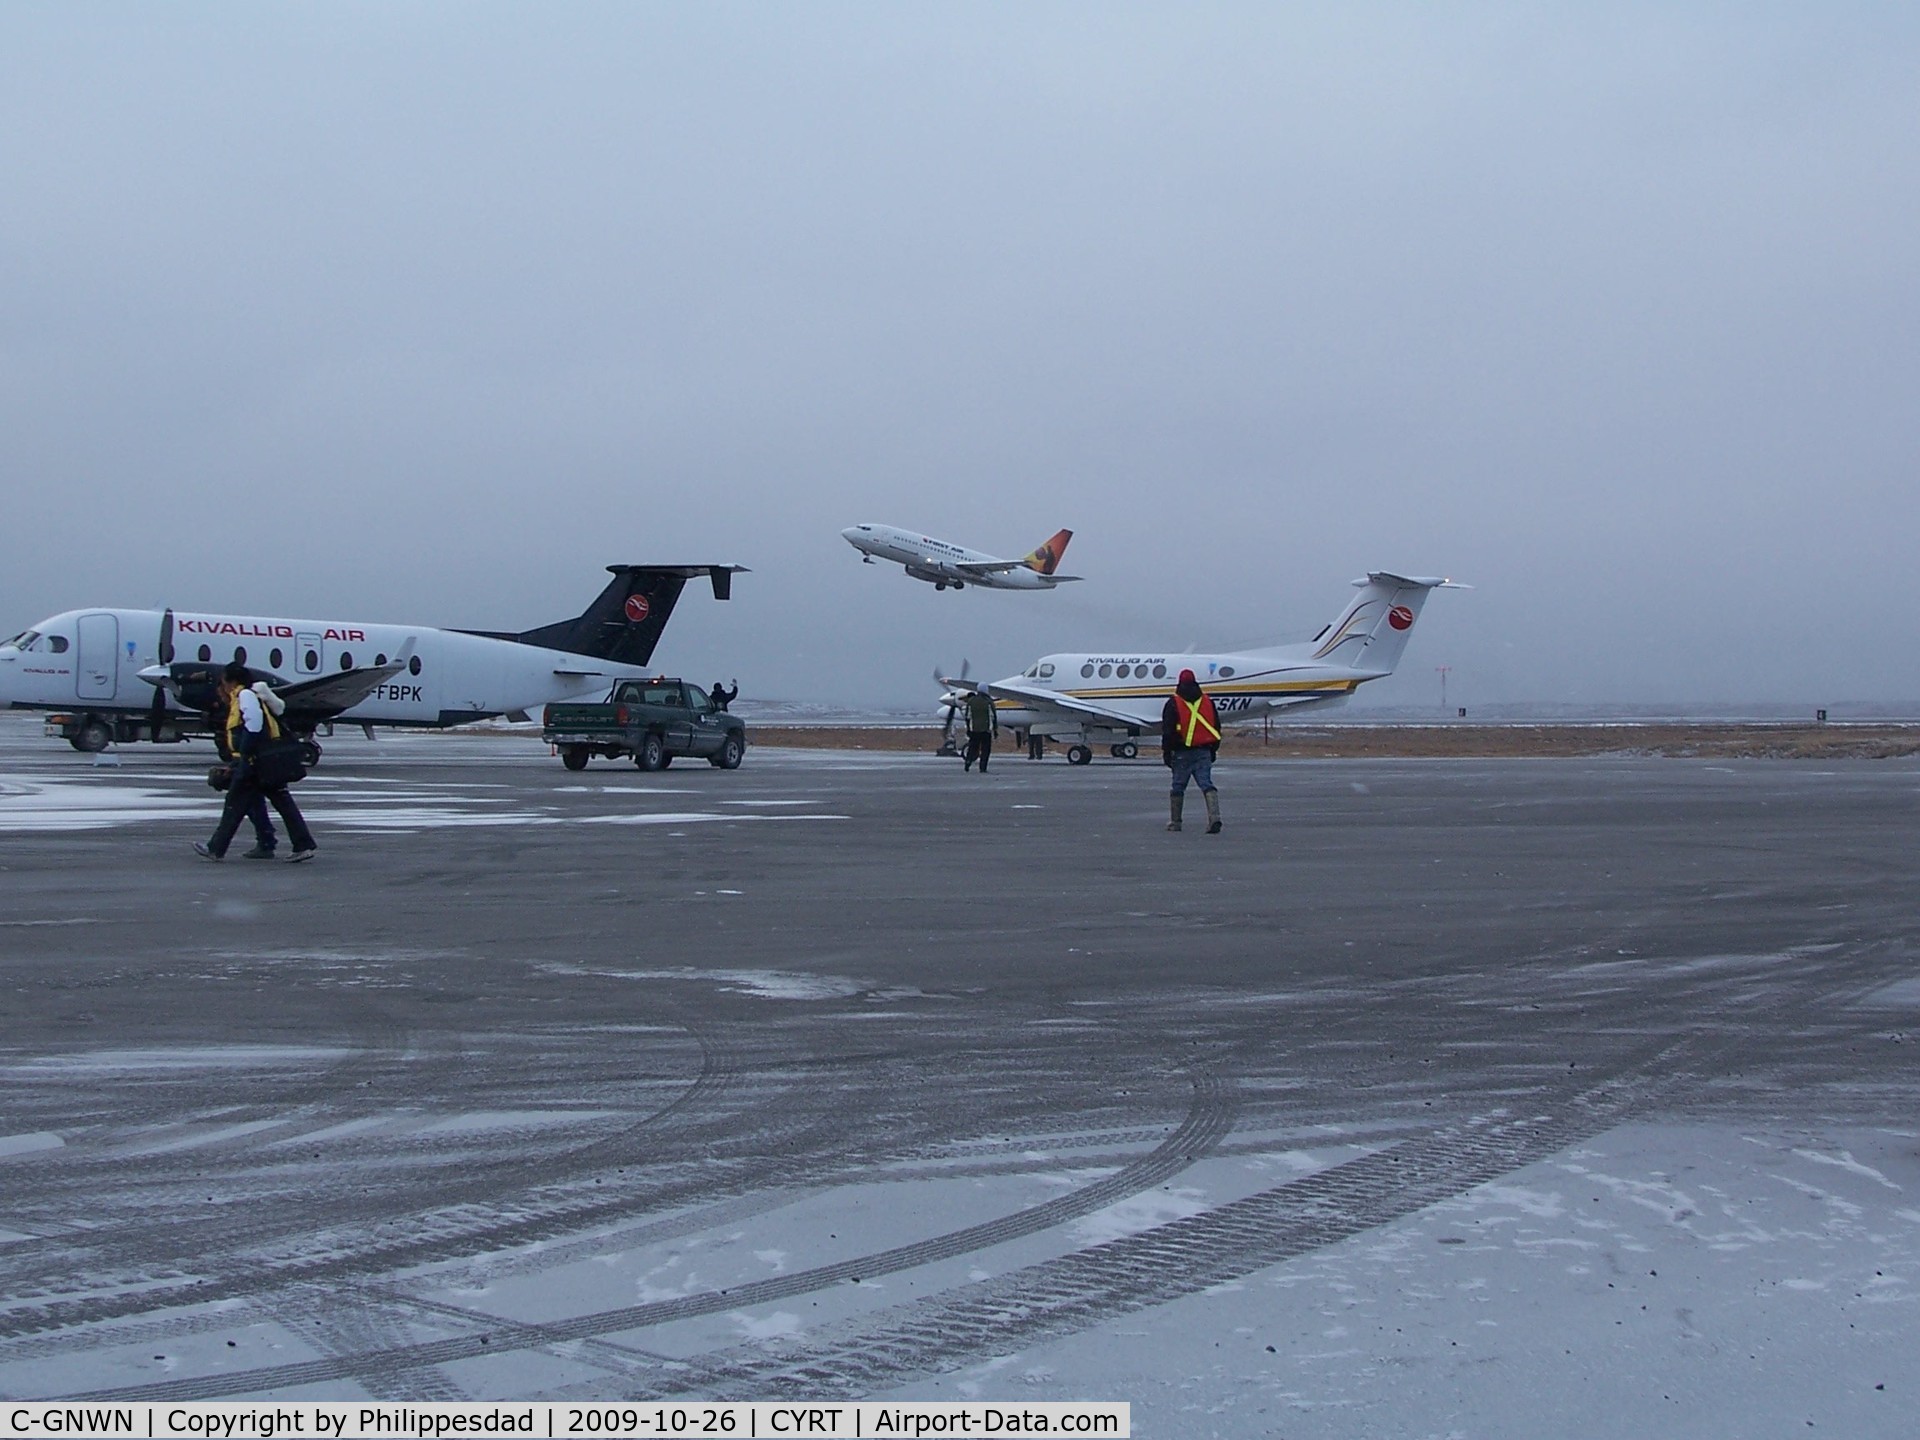 C-GNWN, Boeing 737-210C C/N 21067, C-GNWN taking off, Rankin Inlet, NU  2009oct26 with C-FSKN and C-FBPK in foreground